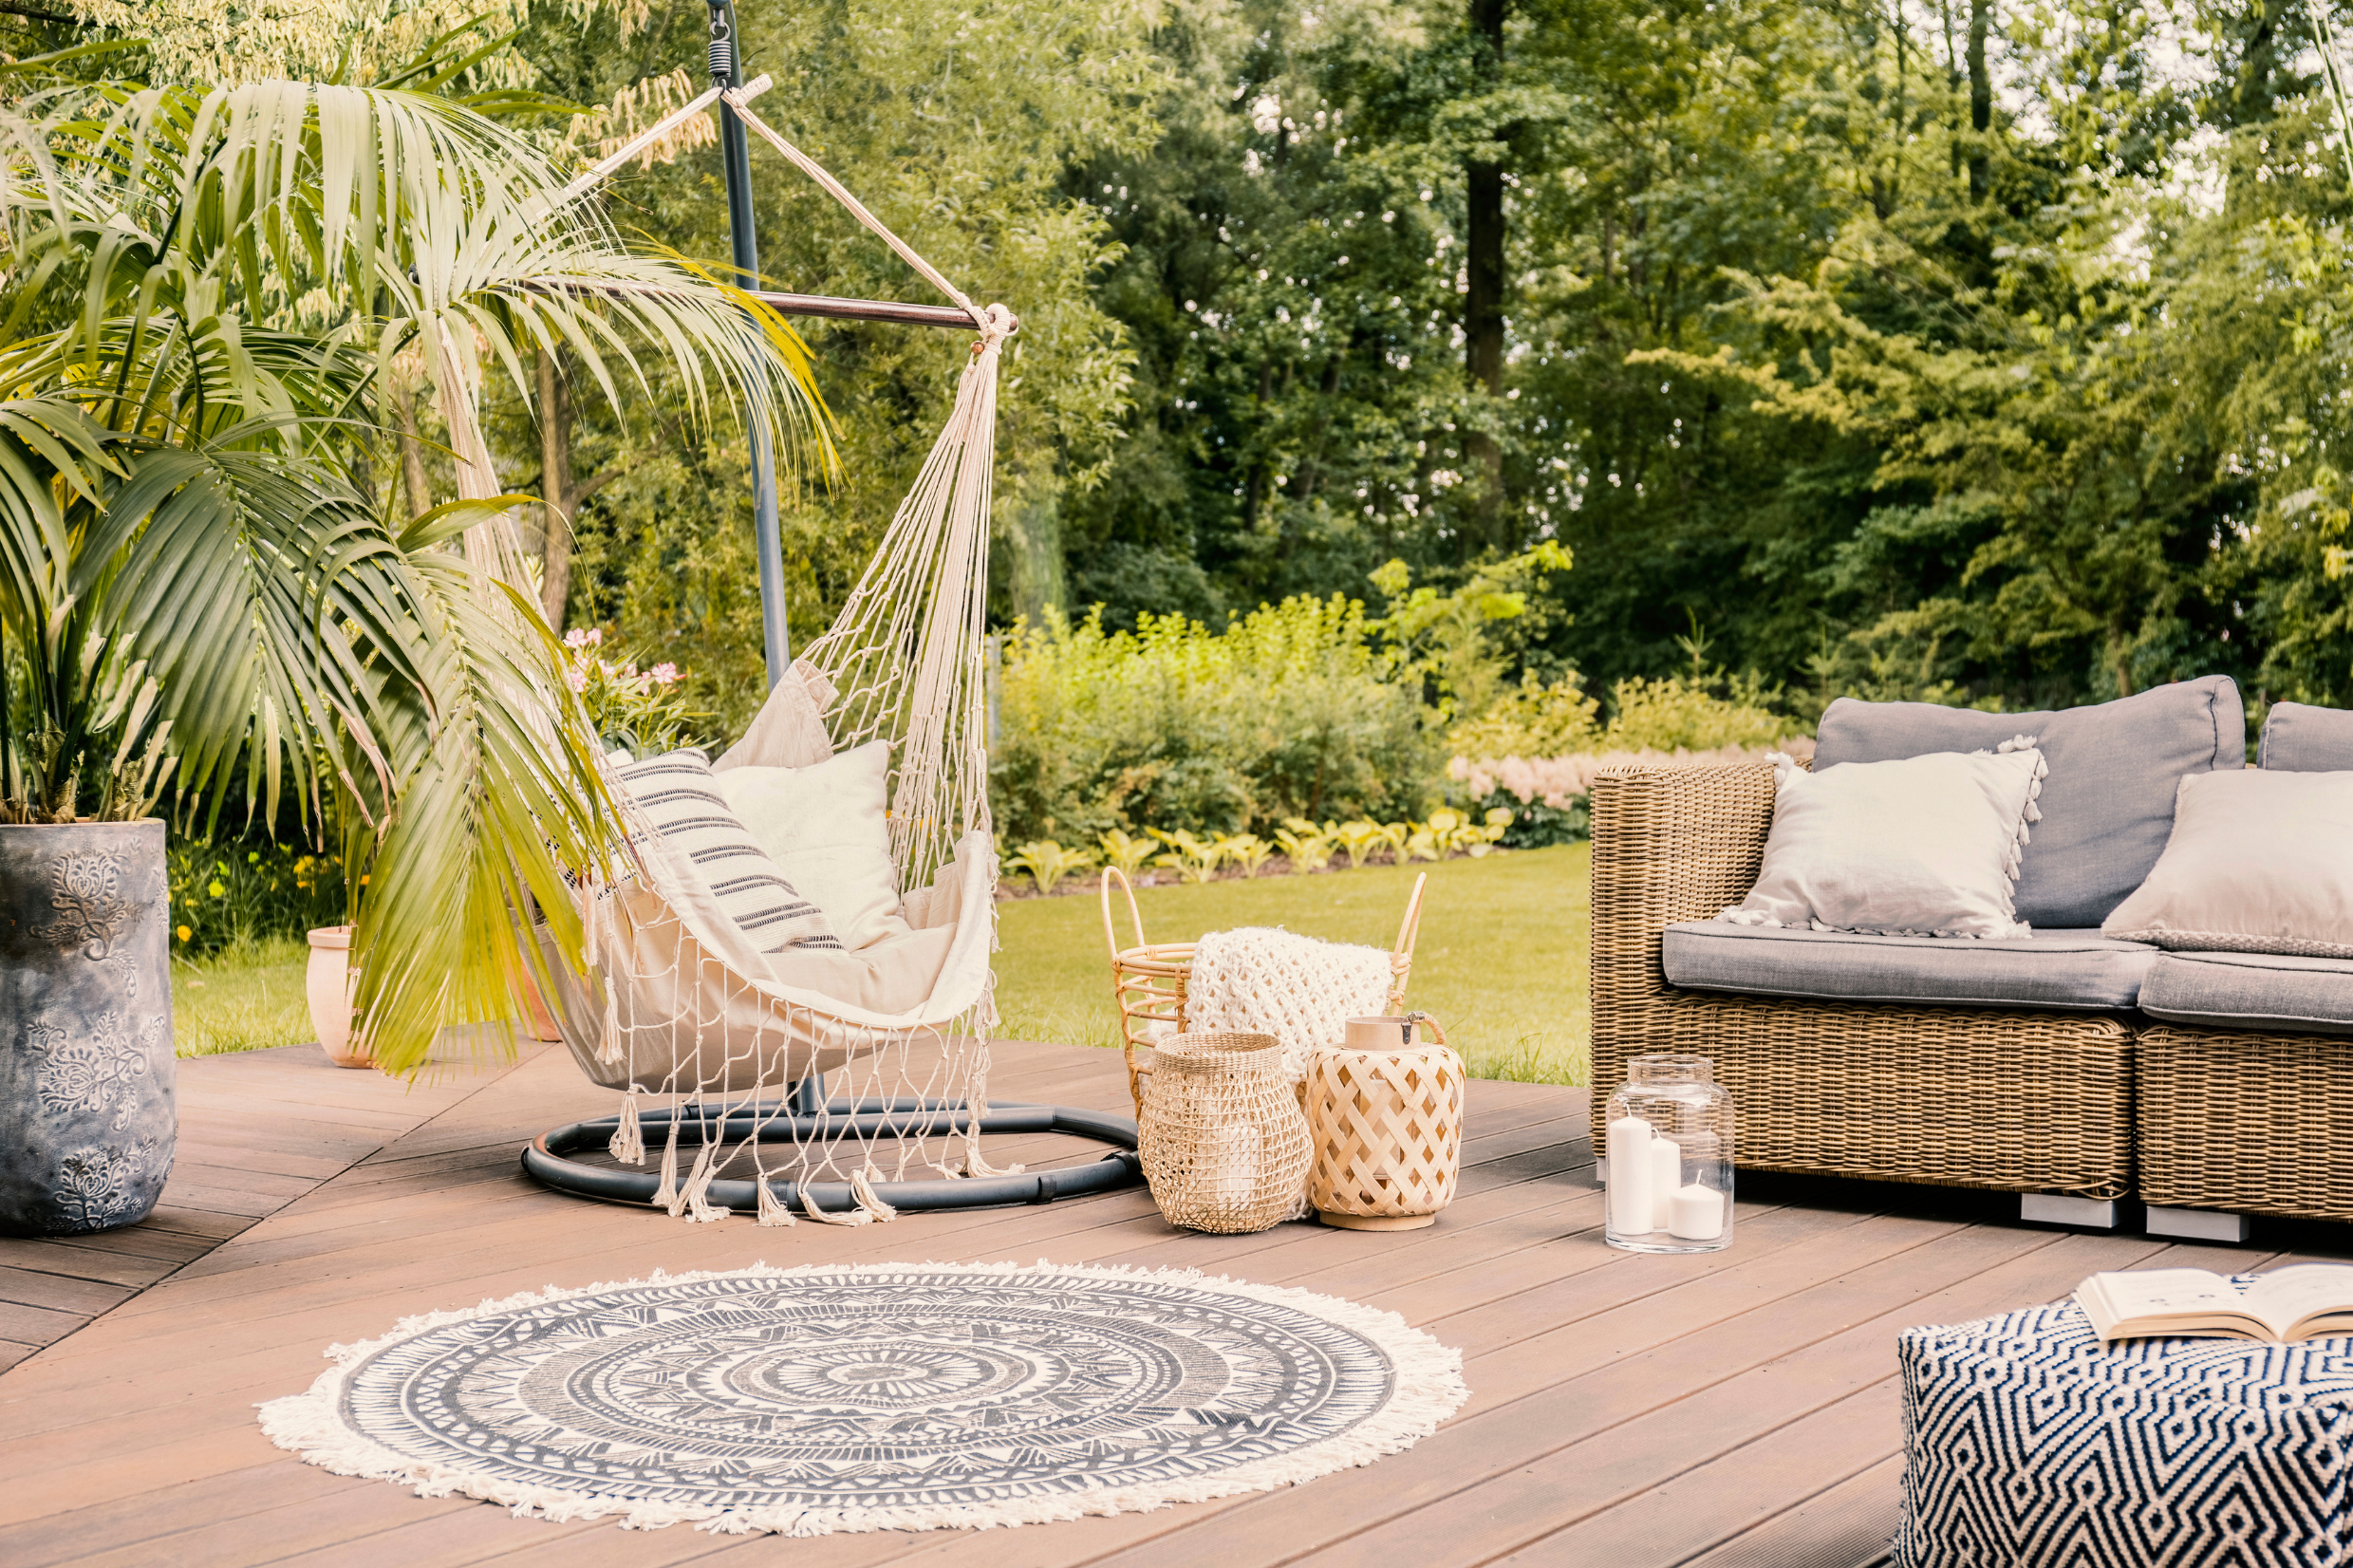 How to Add Charm to Your Terrace This Summer